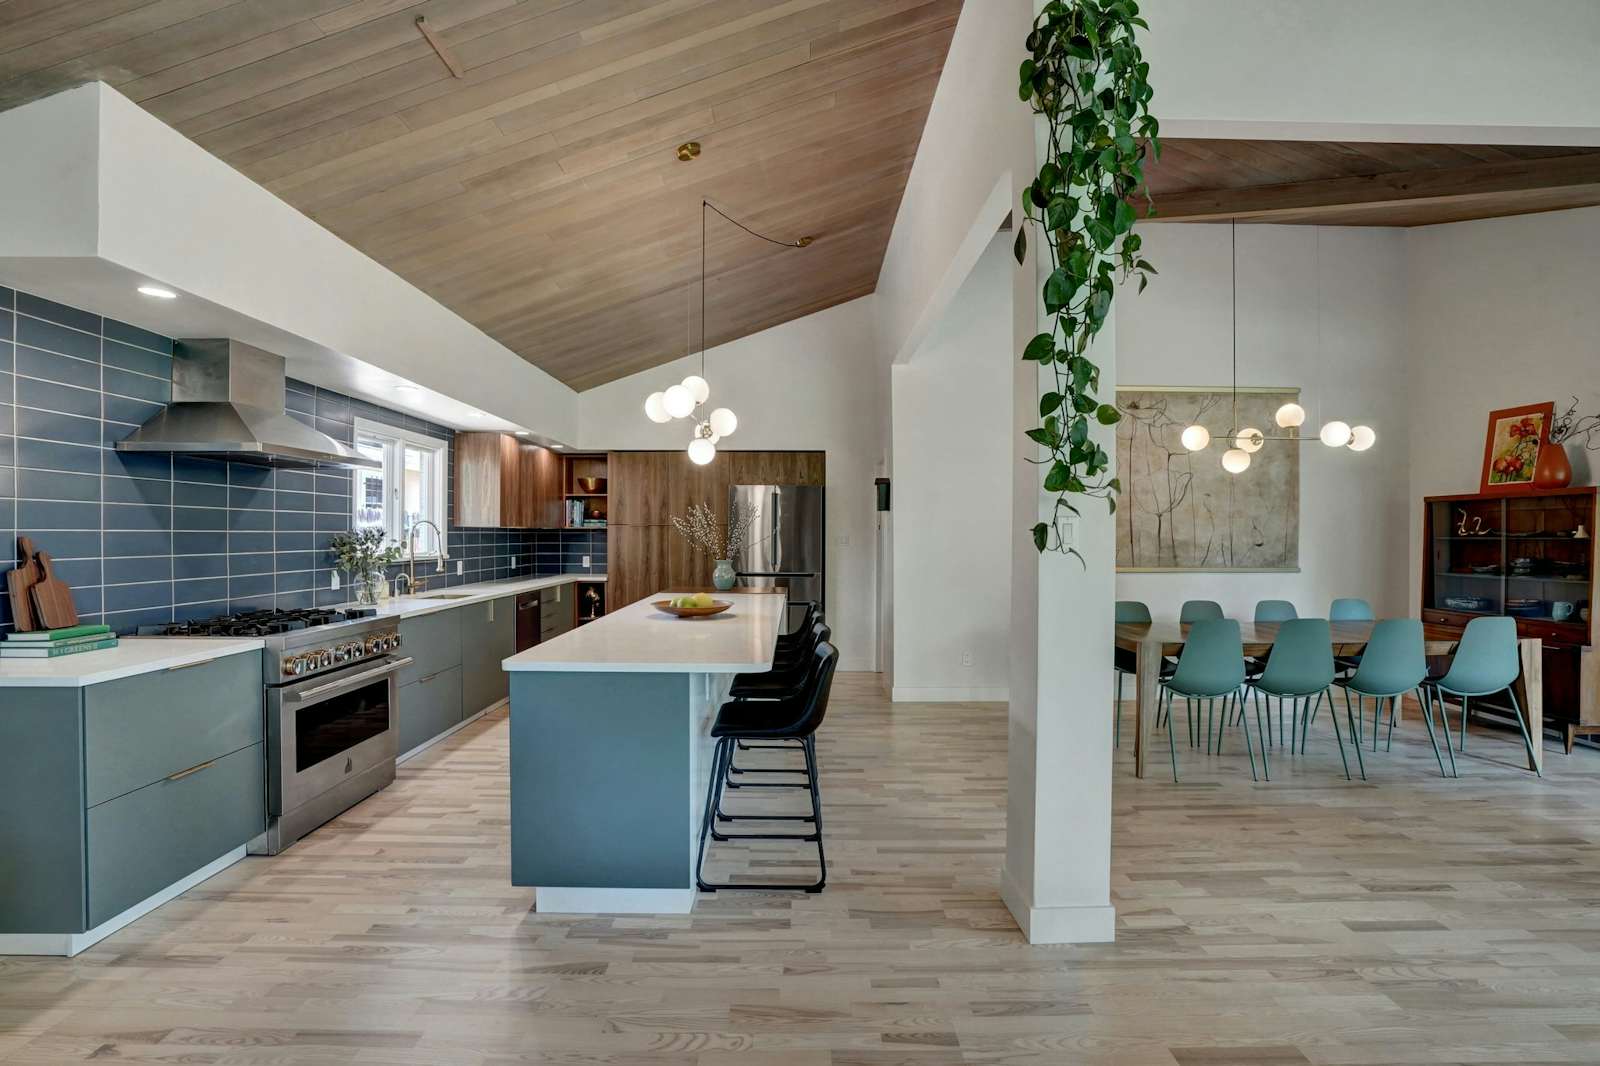 Gorgeous Wood Abounds in This Immaculately Restored Colorado Midcentury ...